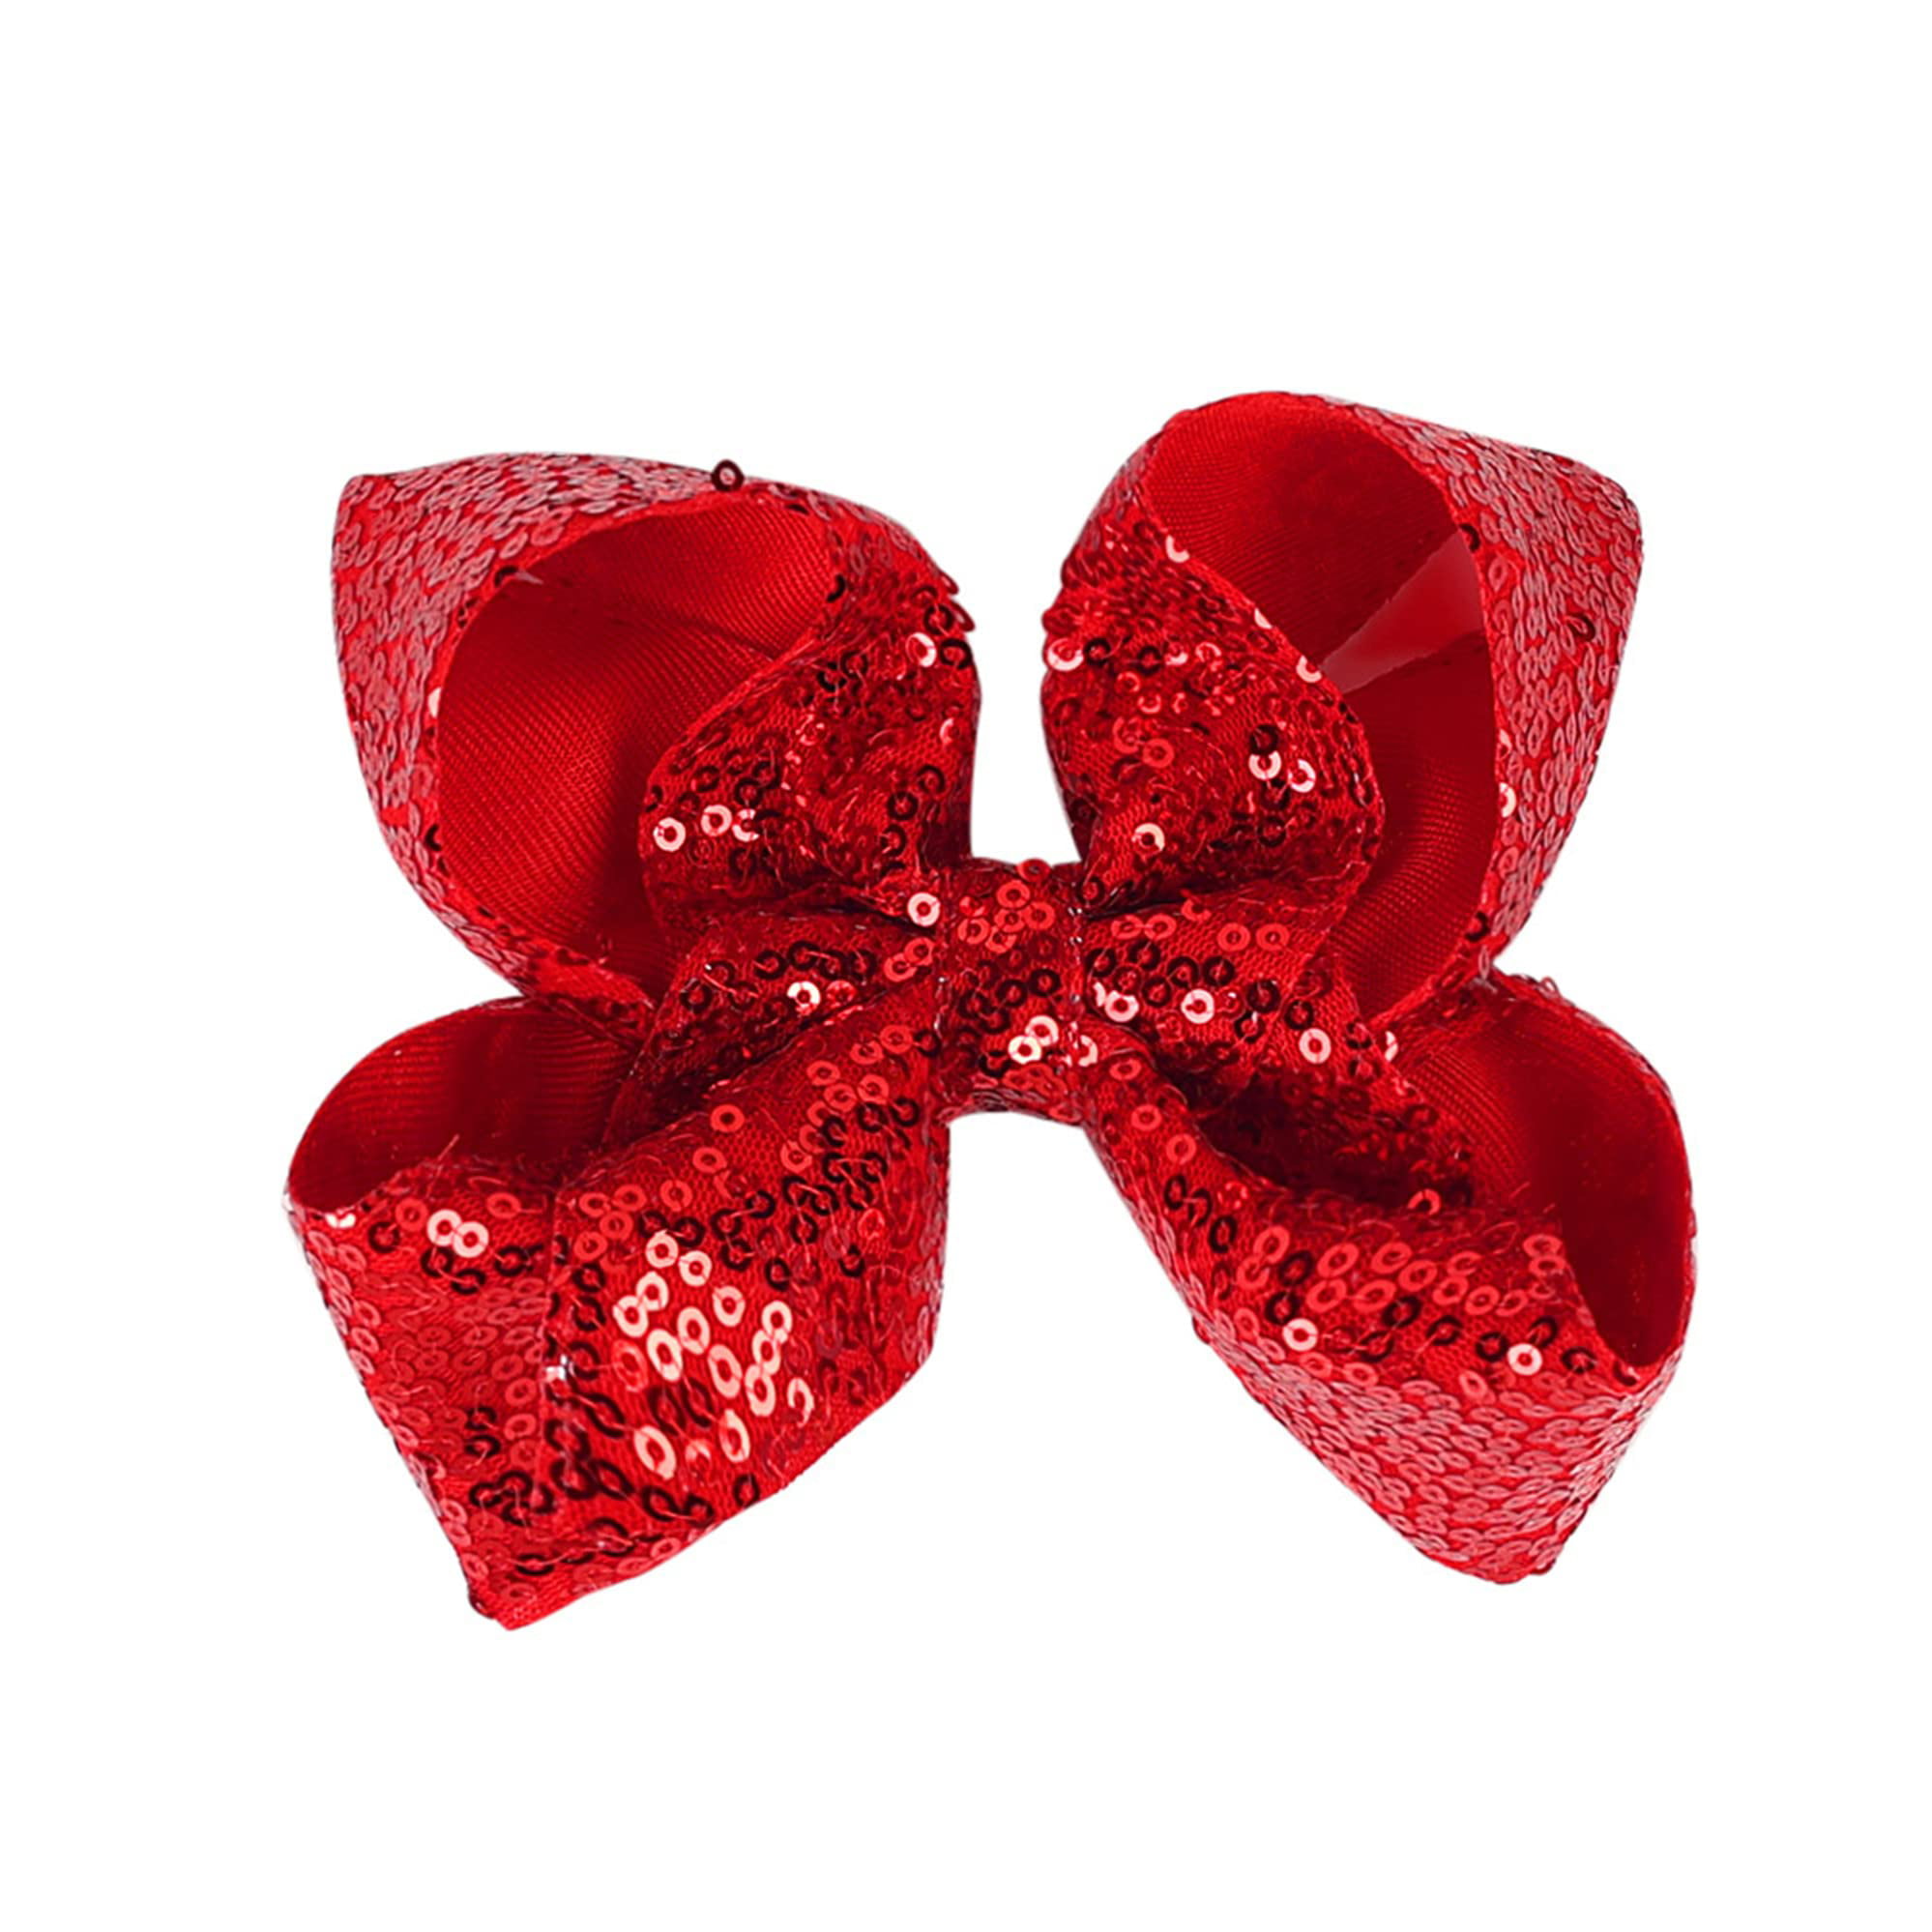 Red Sequin hairpin for Large Red Cheer Hair Bows Glitter Hair Bow(D/D1-Type B) - Walmart.com